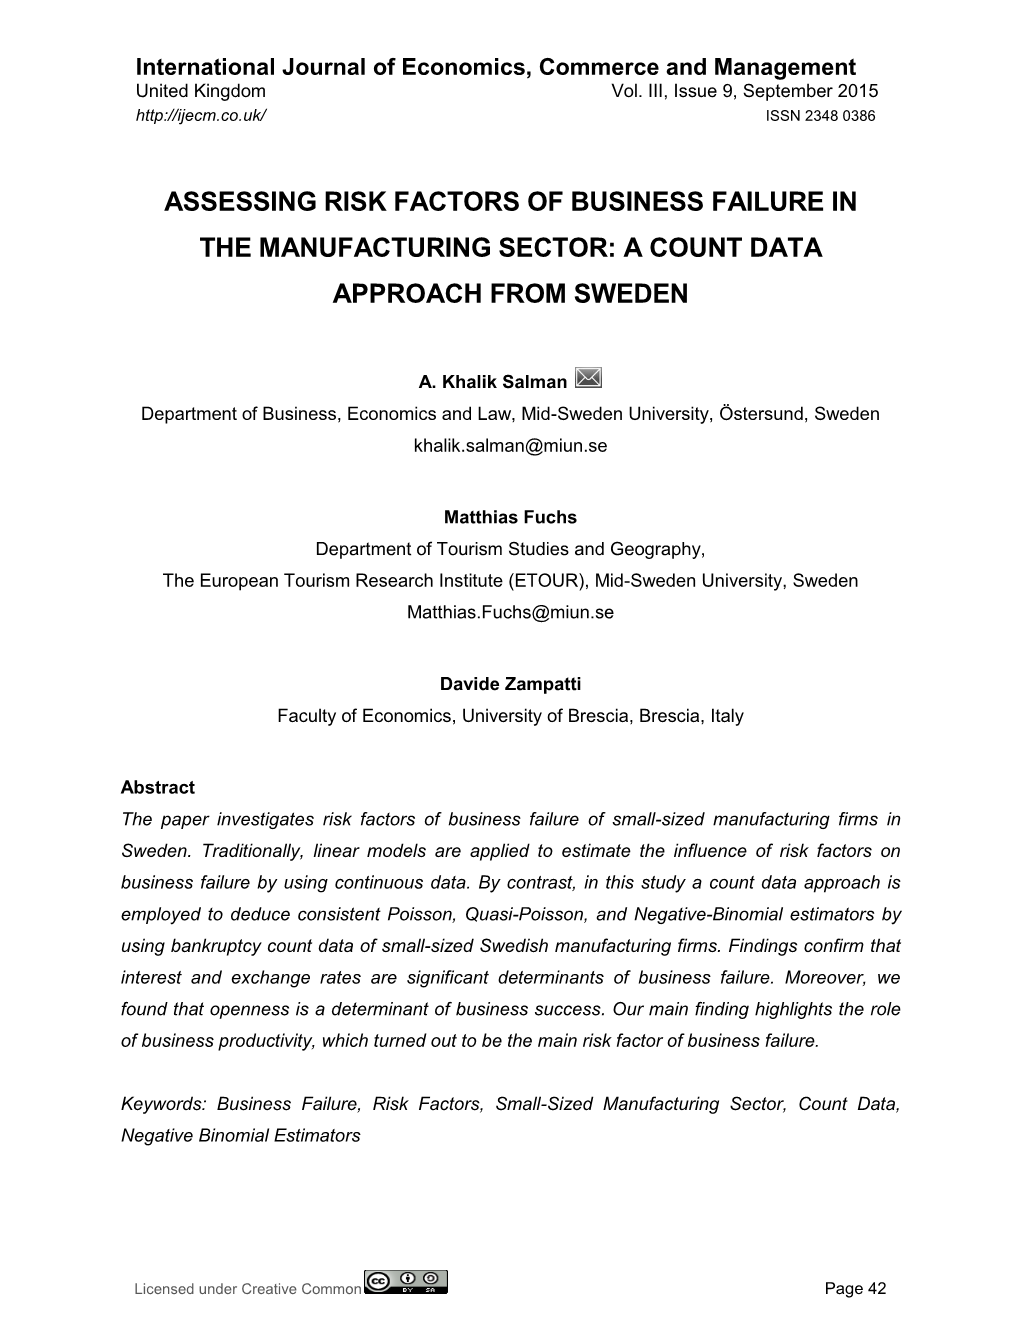 Assessing Risk Factors of Business Failure in the Manufacturing Sector: a Count Data Approach from Sweden